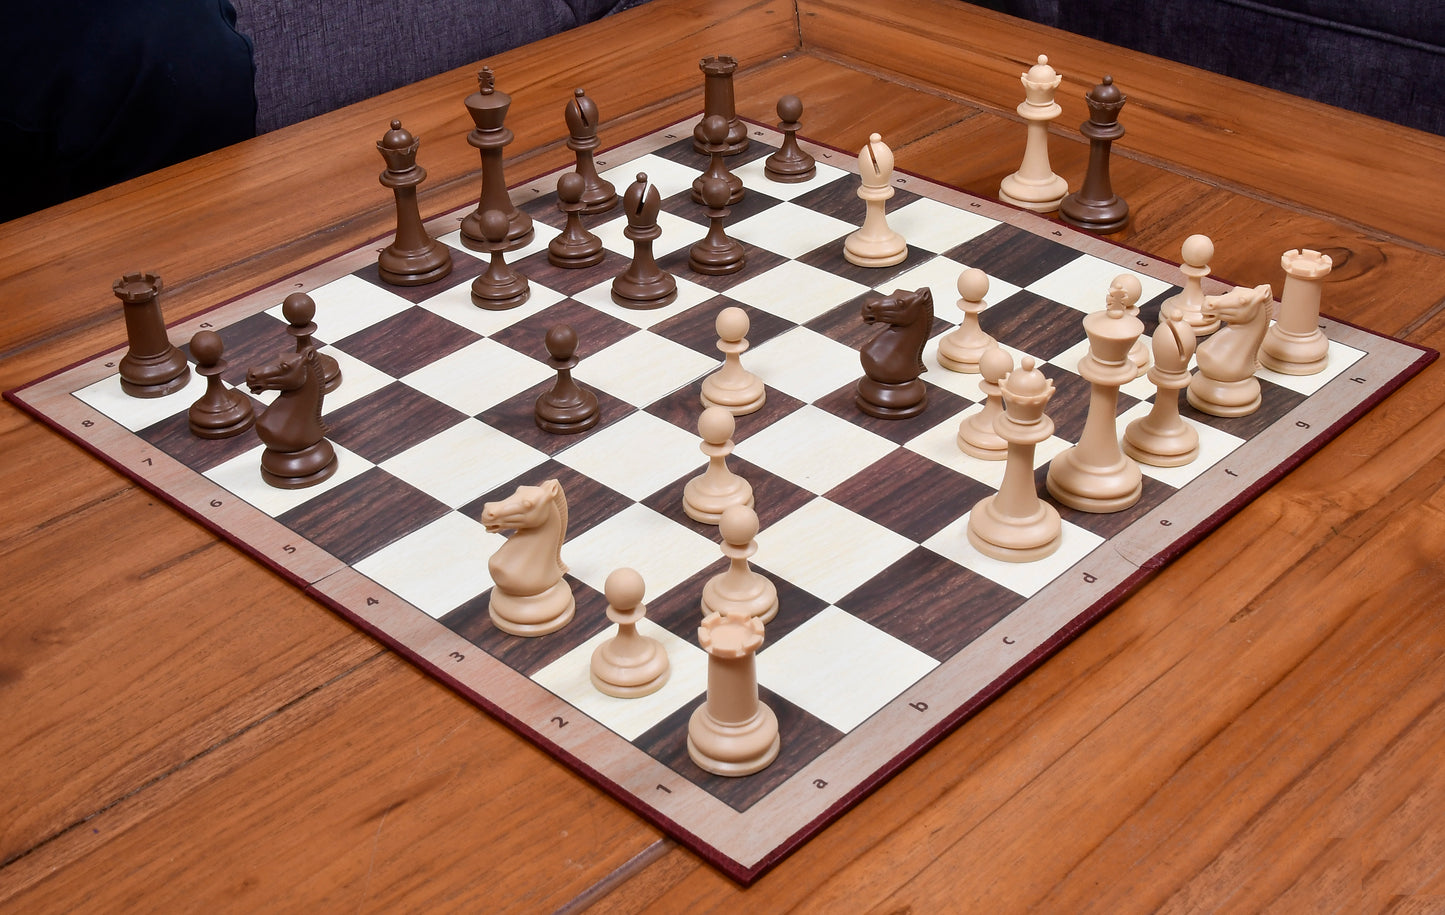 The Blitz Series Plastic Chess Pieces Dyed in Sandalwood and Chocolate Brown - 3.8" King